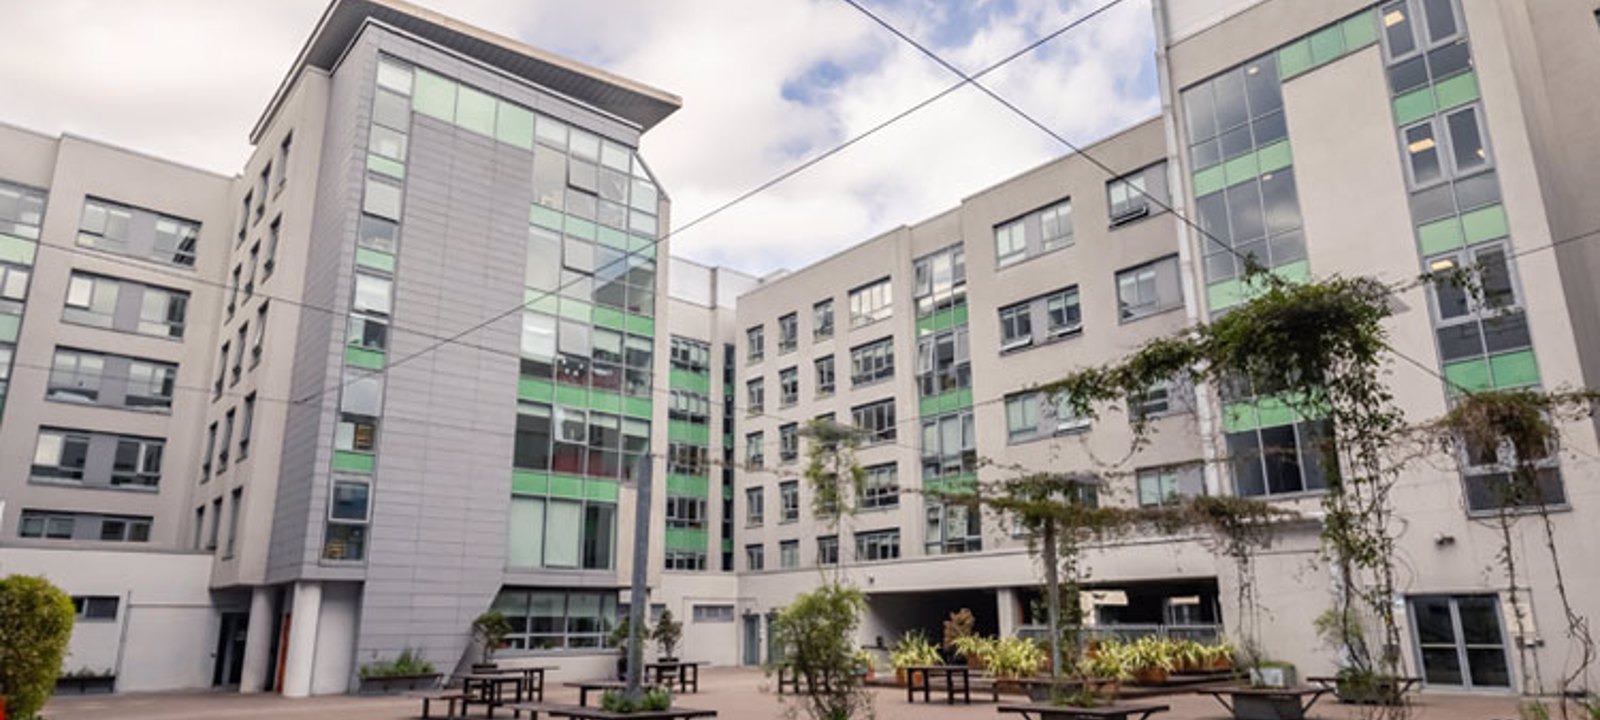 Our Vision Dublin Student Accommodation